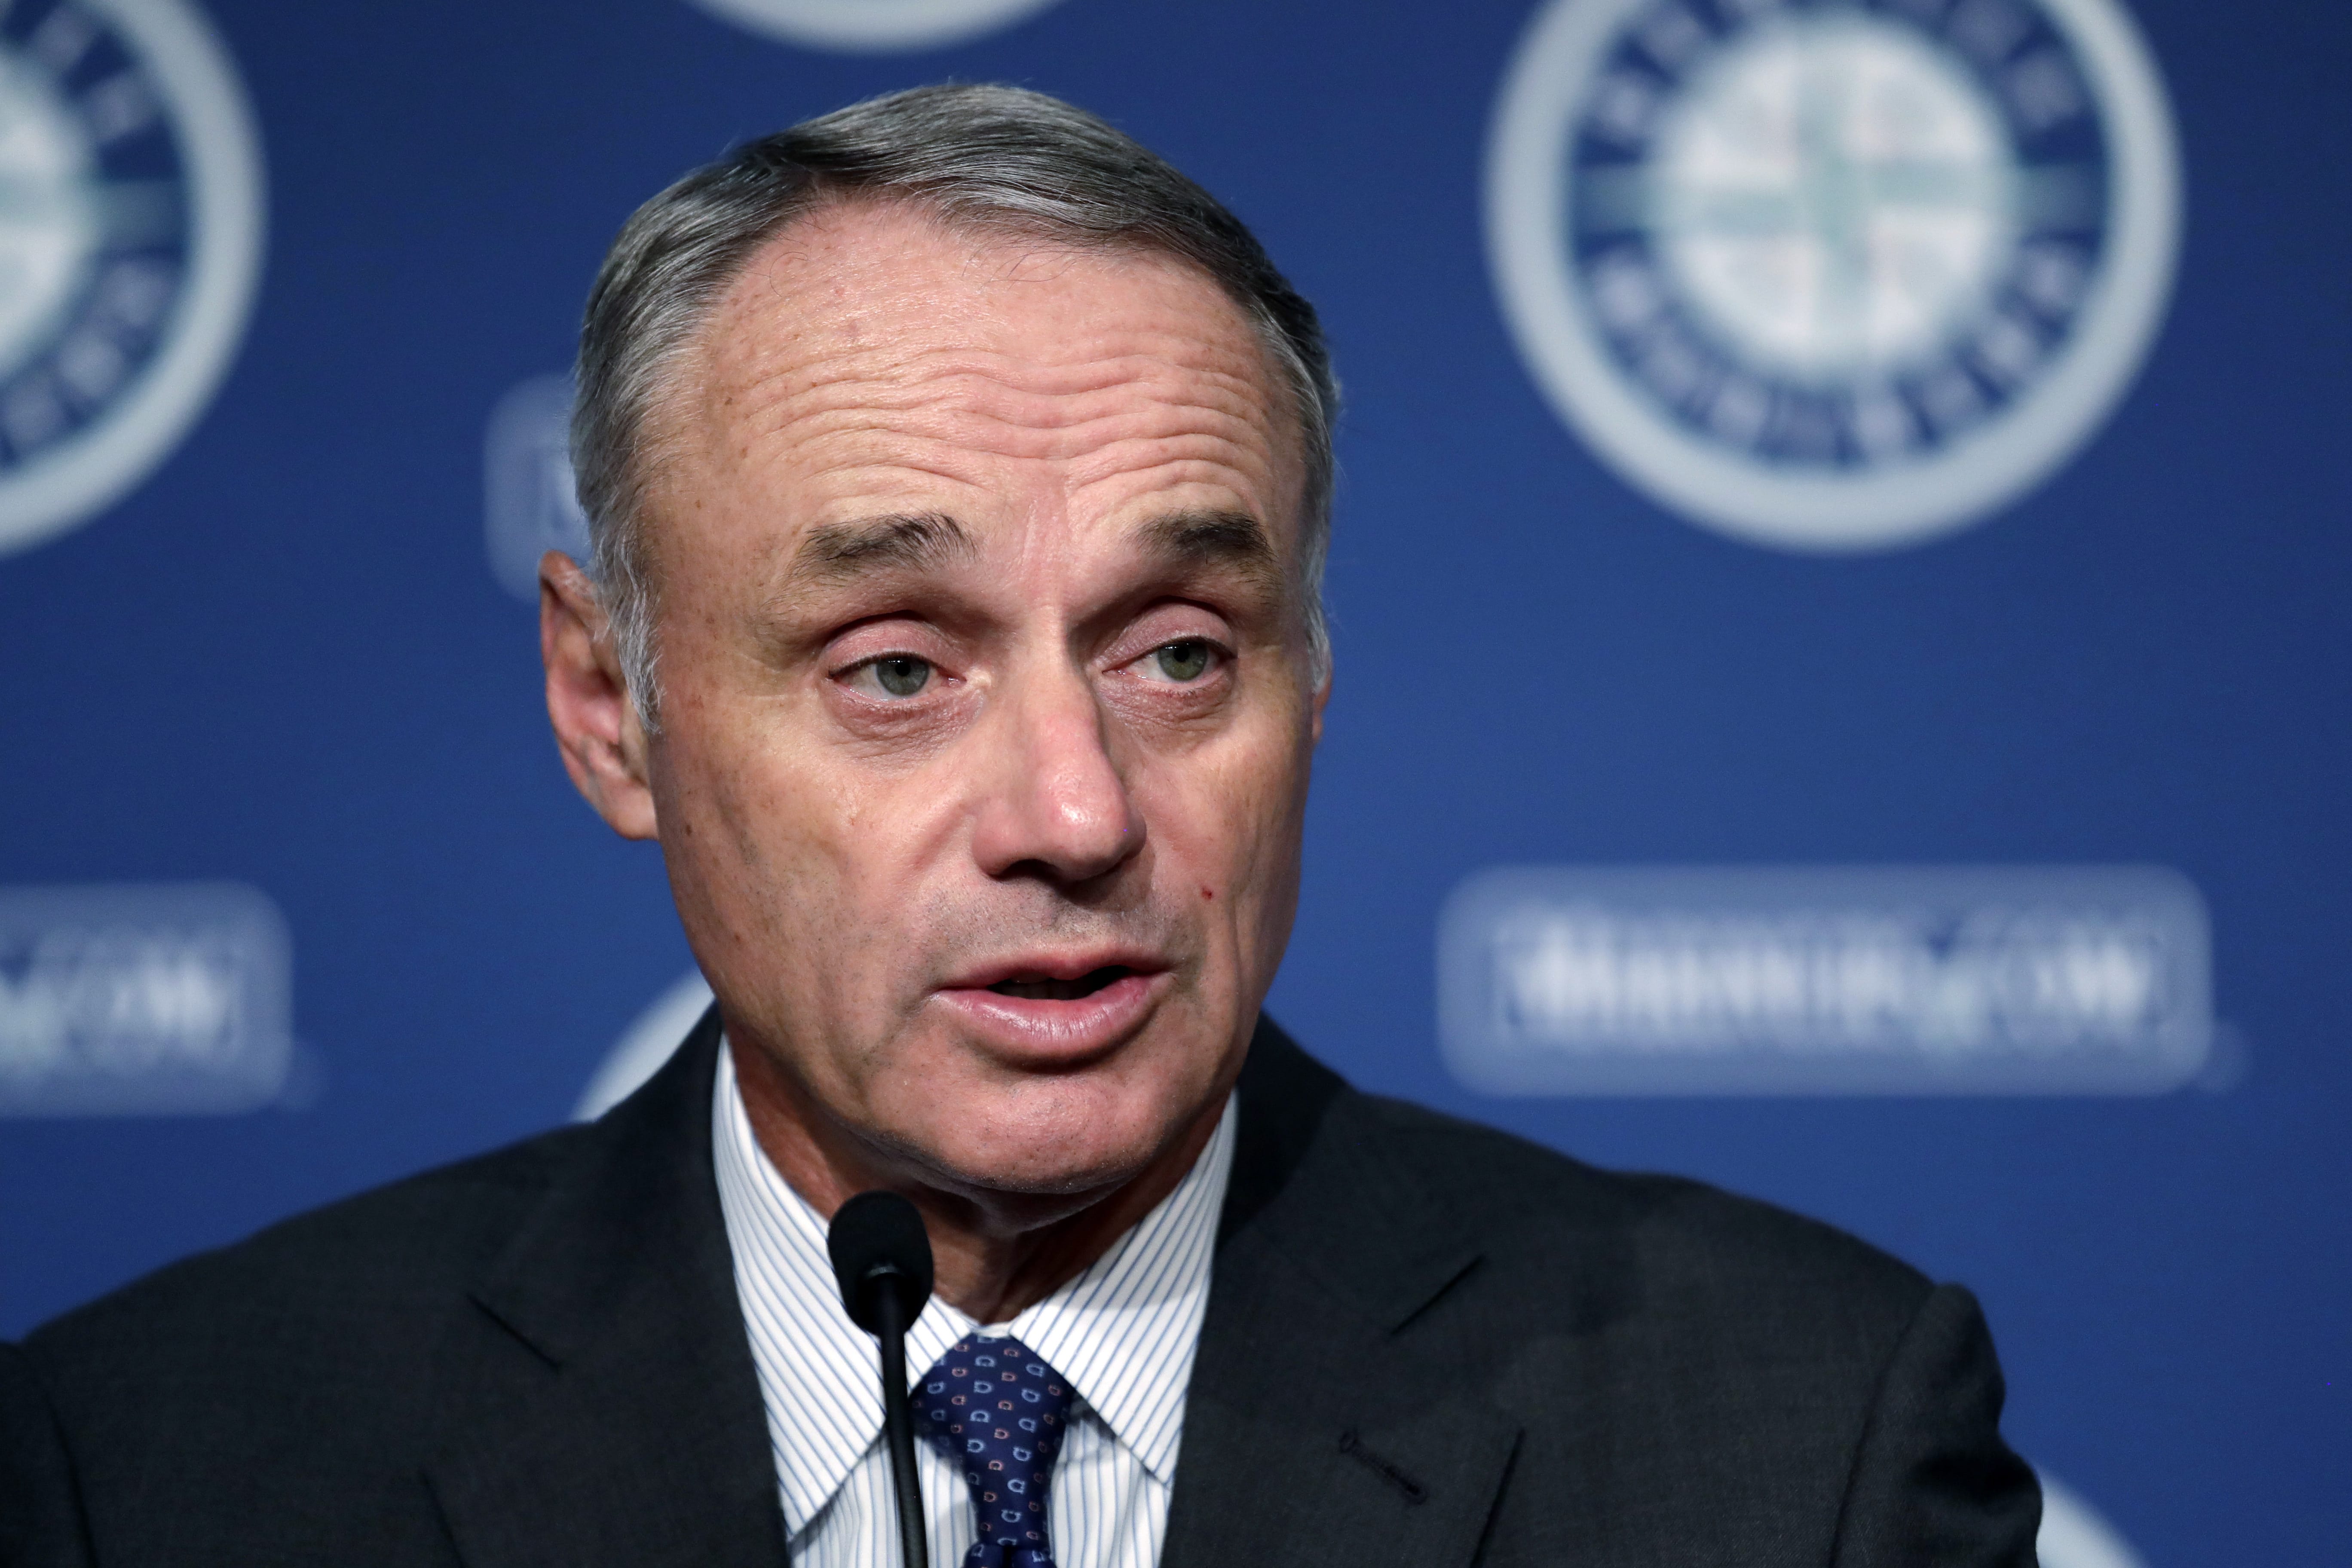 Baseball Commissioner Rob Manfred addresses reporters before a baseball game between the Seattle Mariners and the Houston Astros on Tuesday, June 4, 2019, in Seattle.